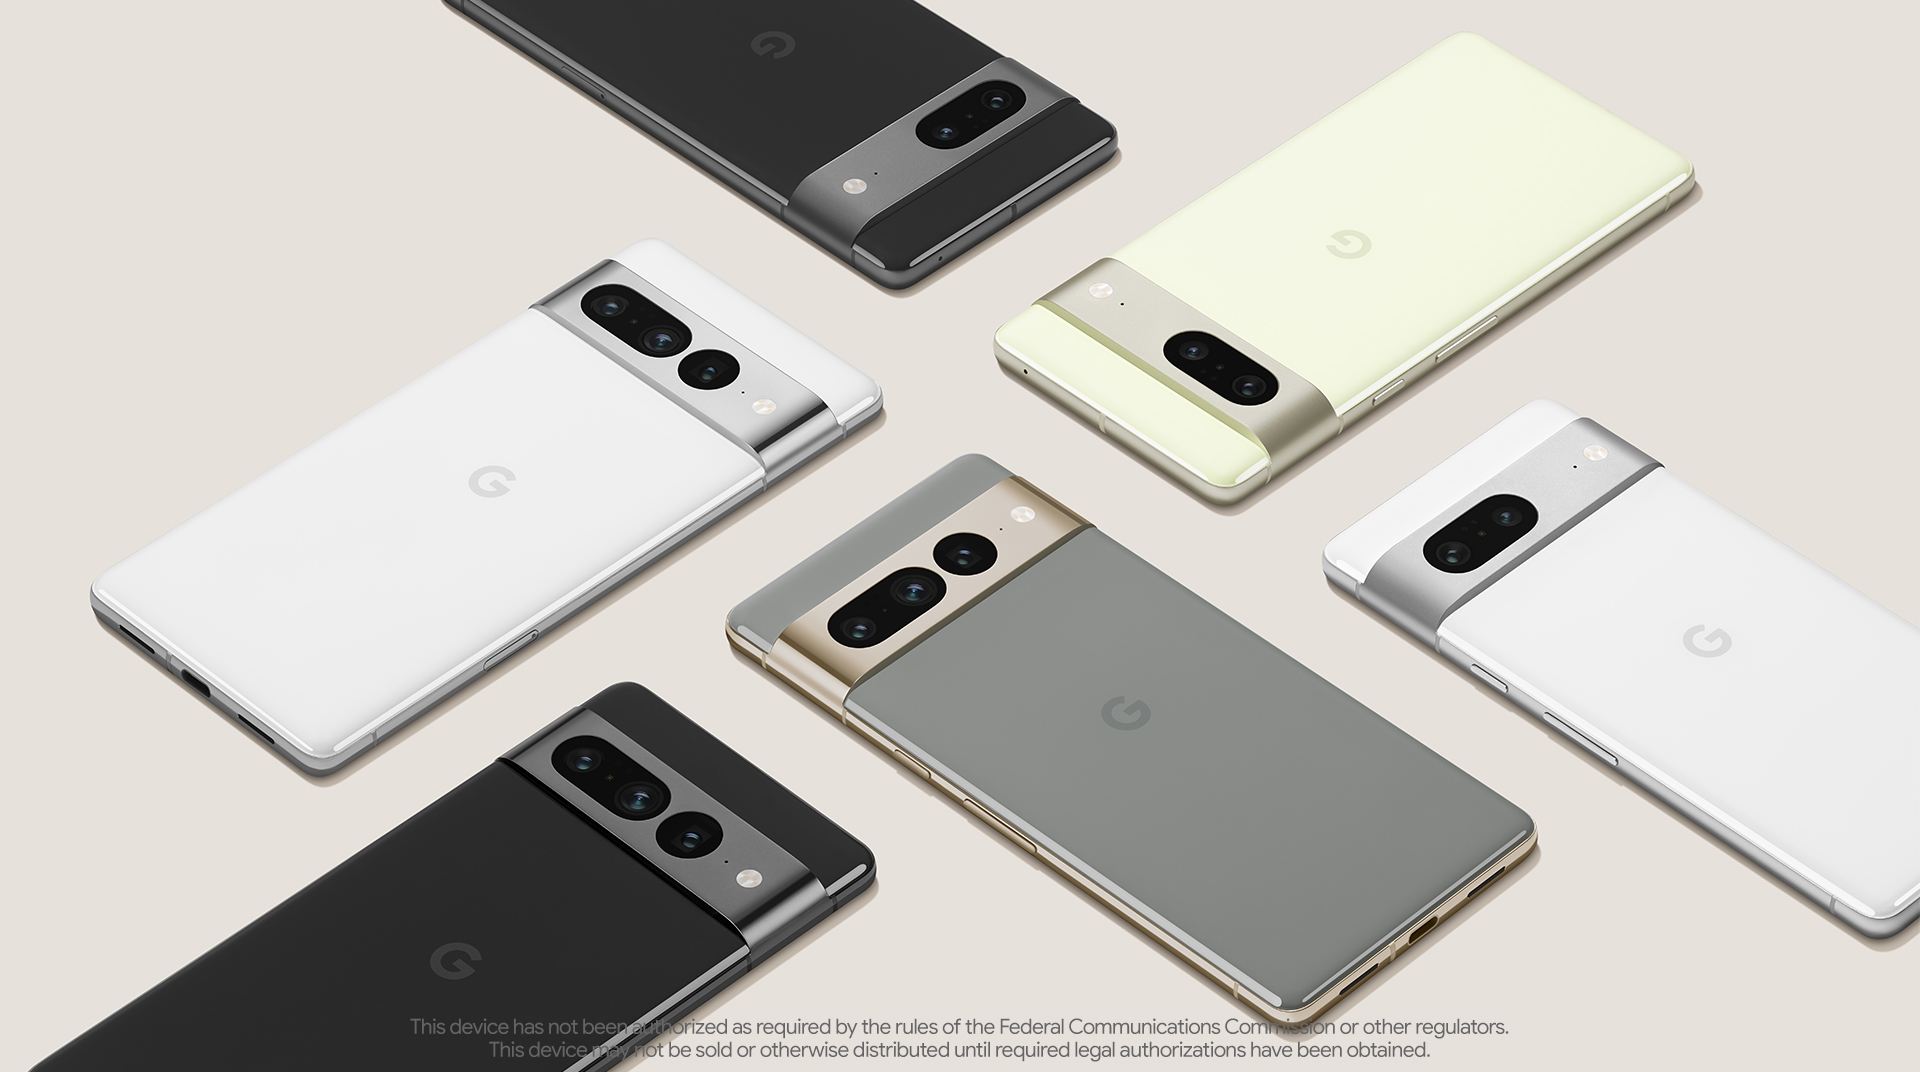 Upcoming Google Pixel 7a may feature an upgraded display from Samsung